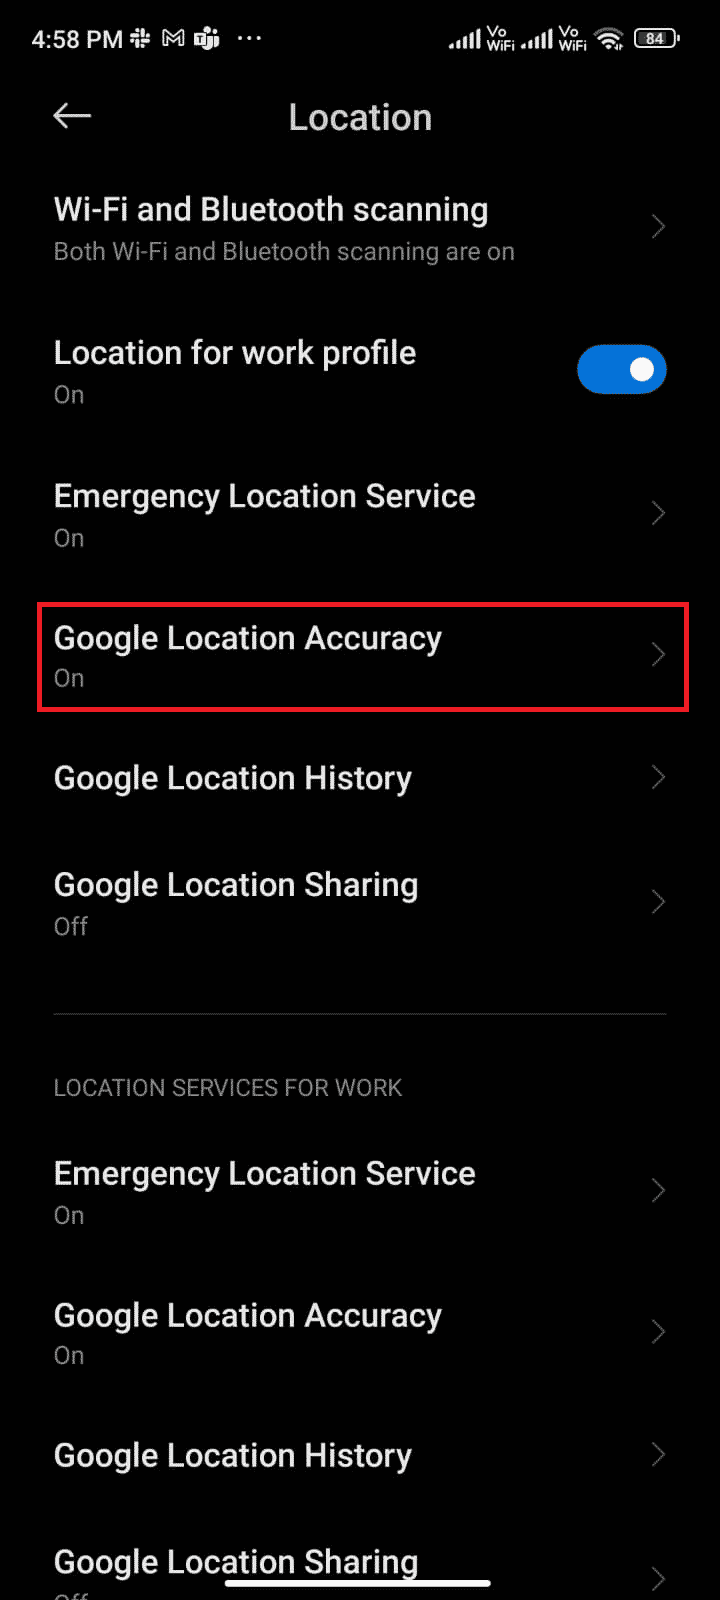 Then, tap the Google Location Accuracy option .